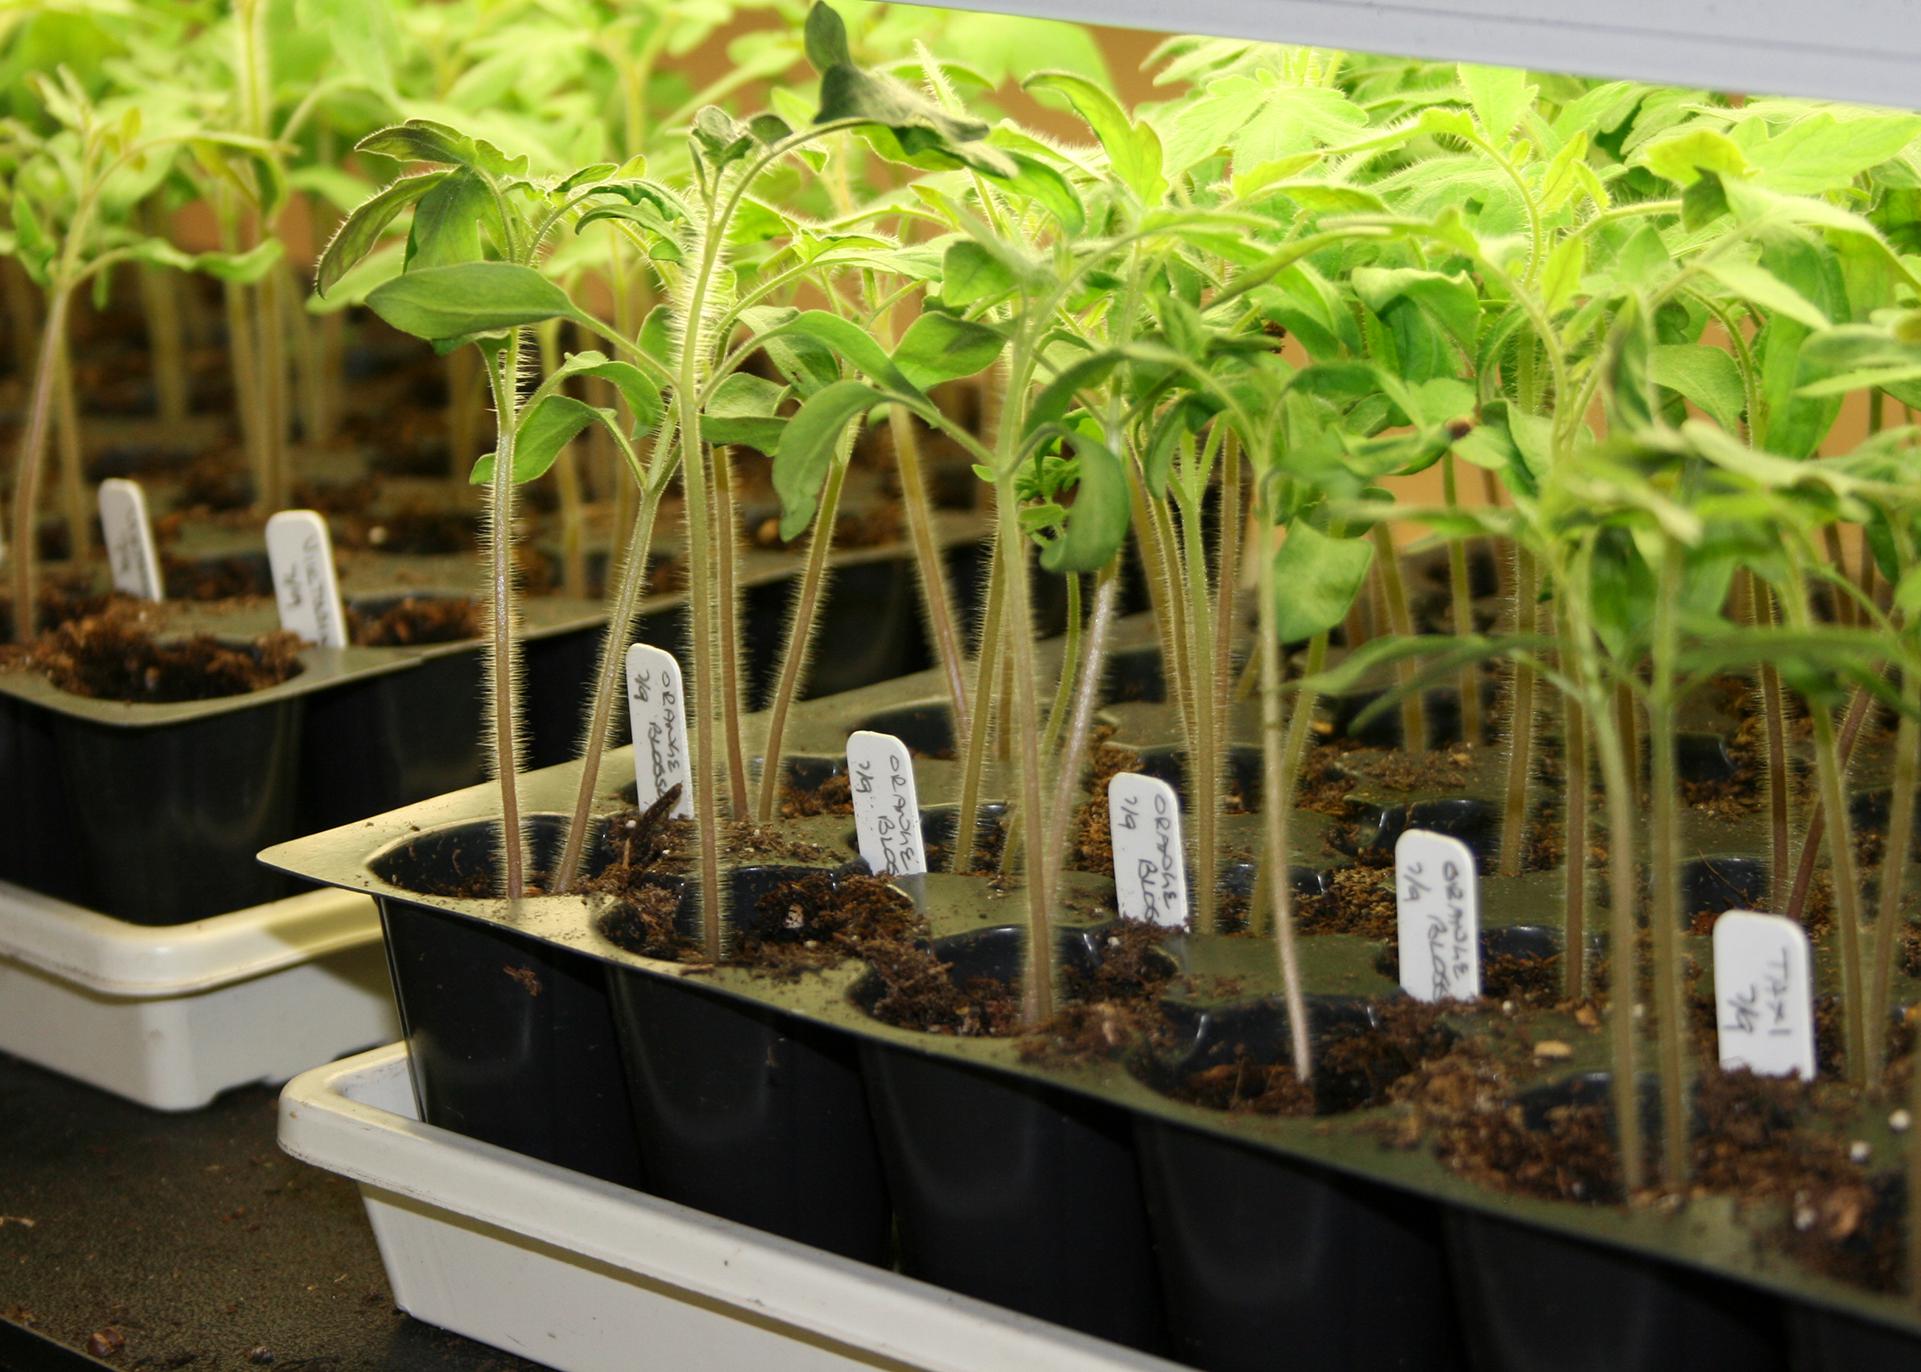 Slender, green seedlings grow in rows under lights in black trays marked by white tags.